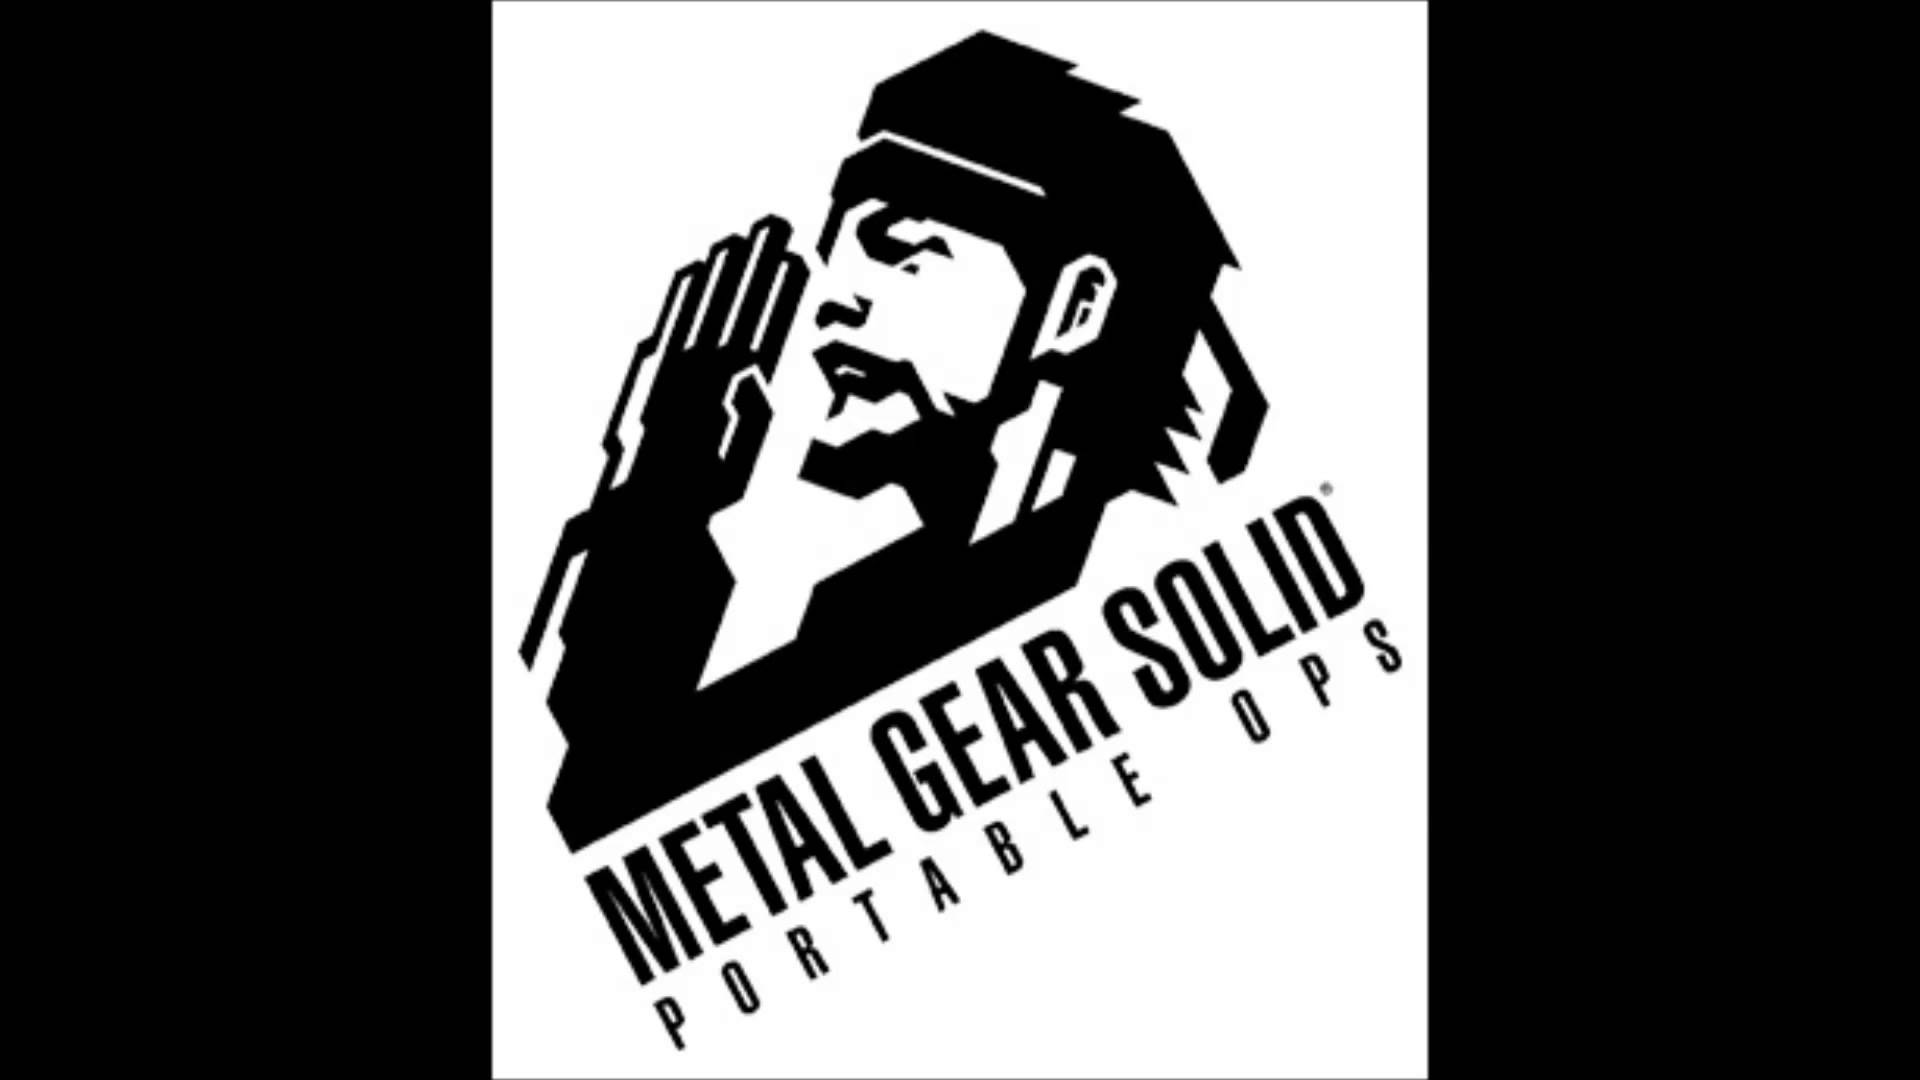 Metal Gear Solid: Portable Ops Pics, Video Game Collection